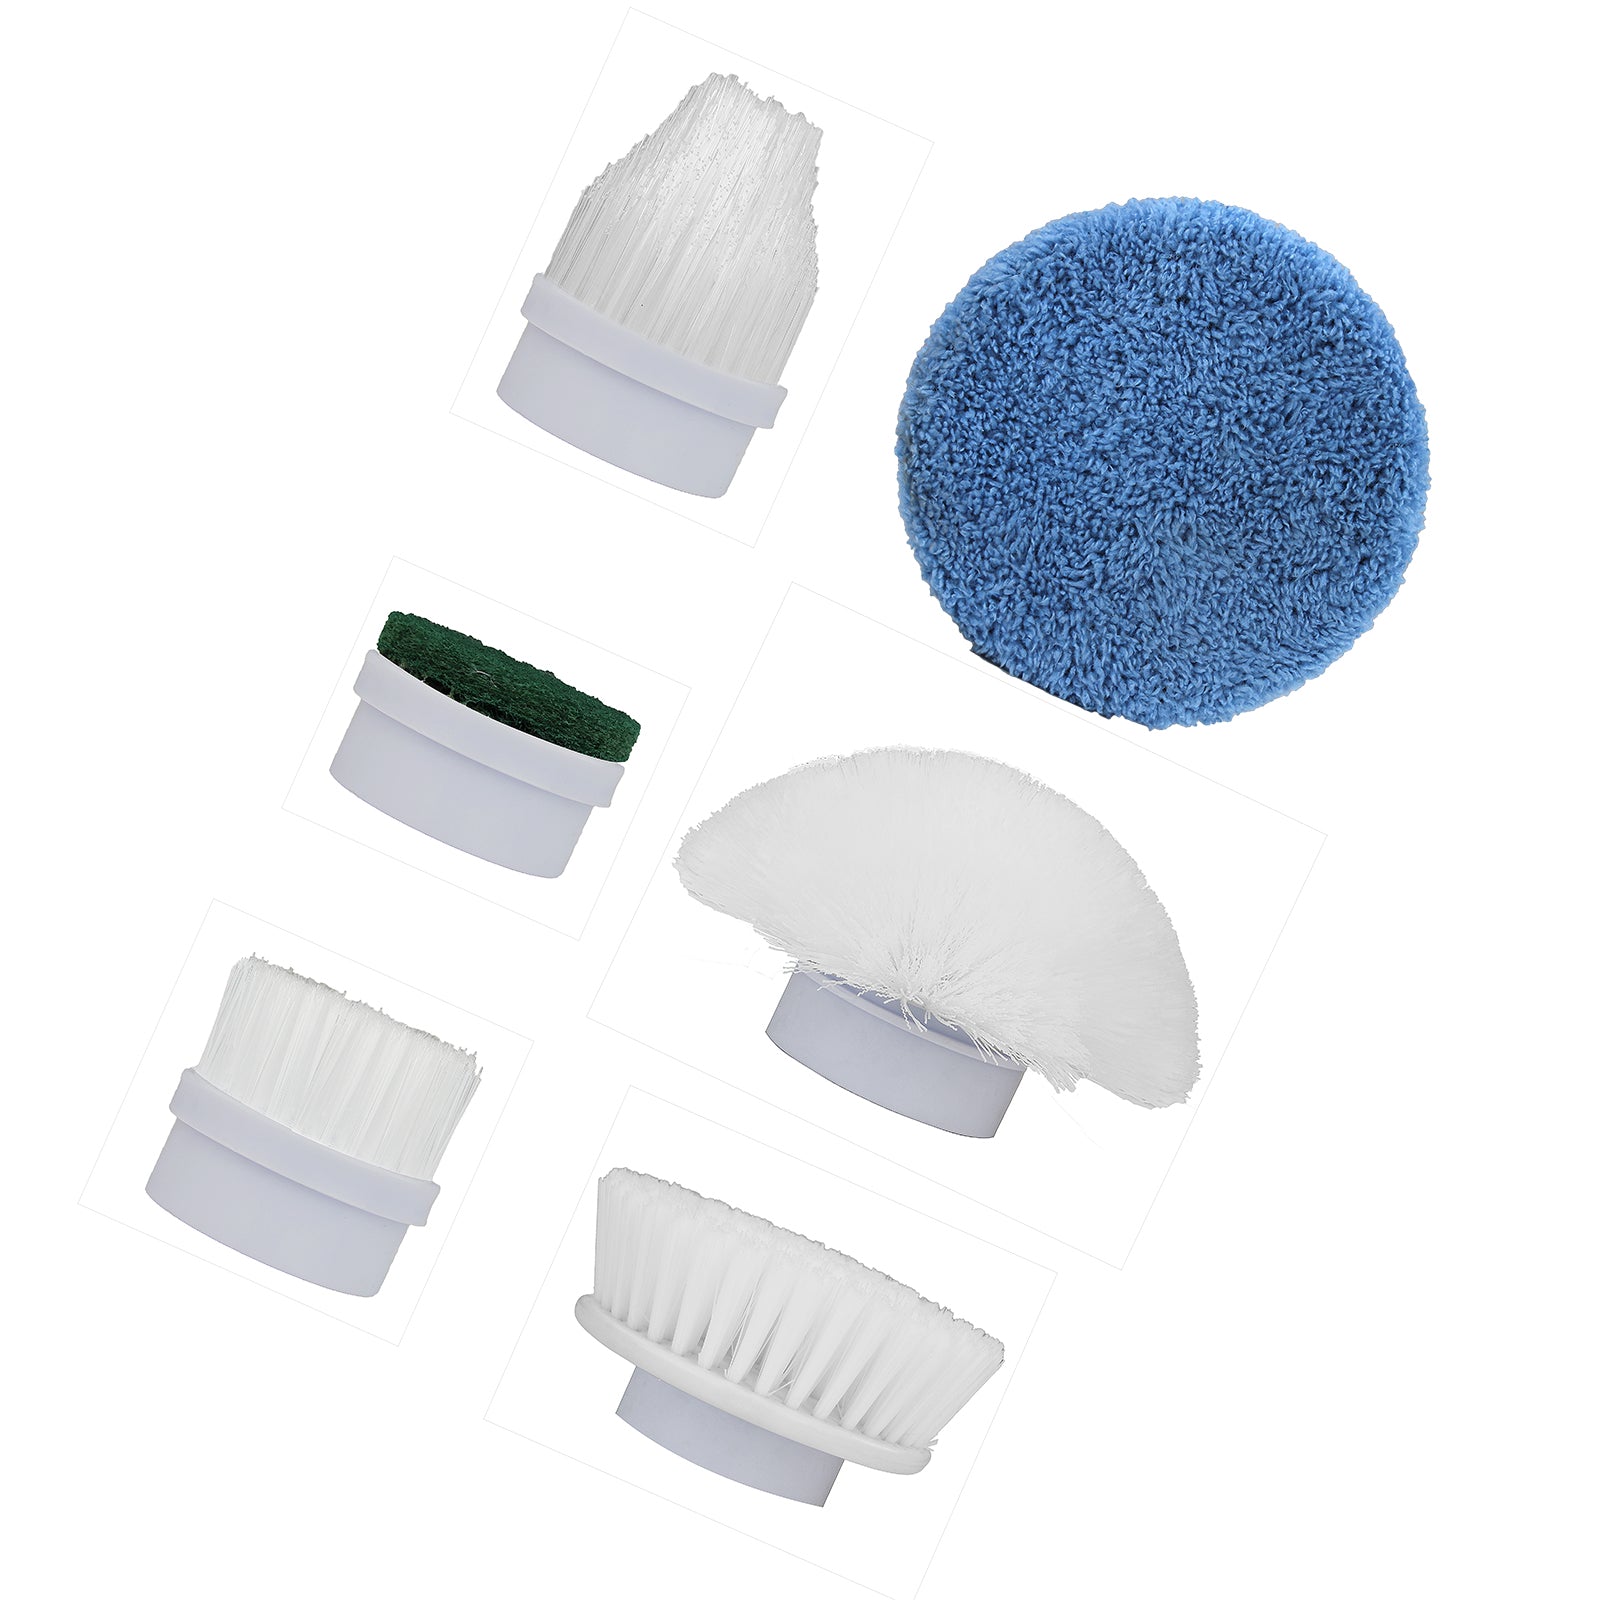 AMOS Super Scrubber Replacement Brush Heads